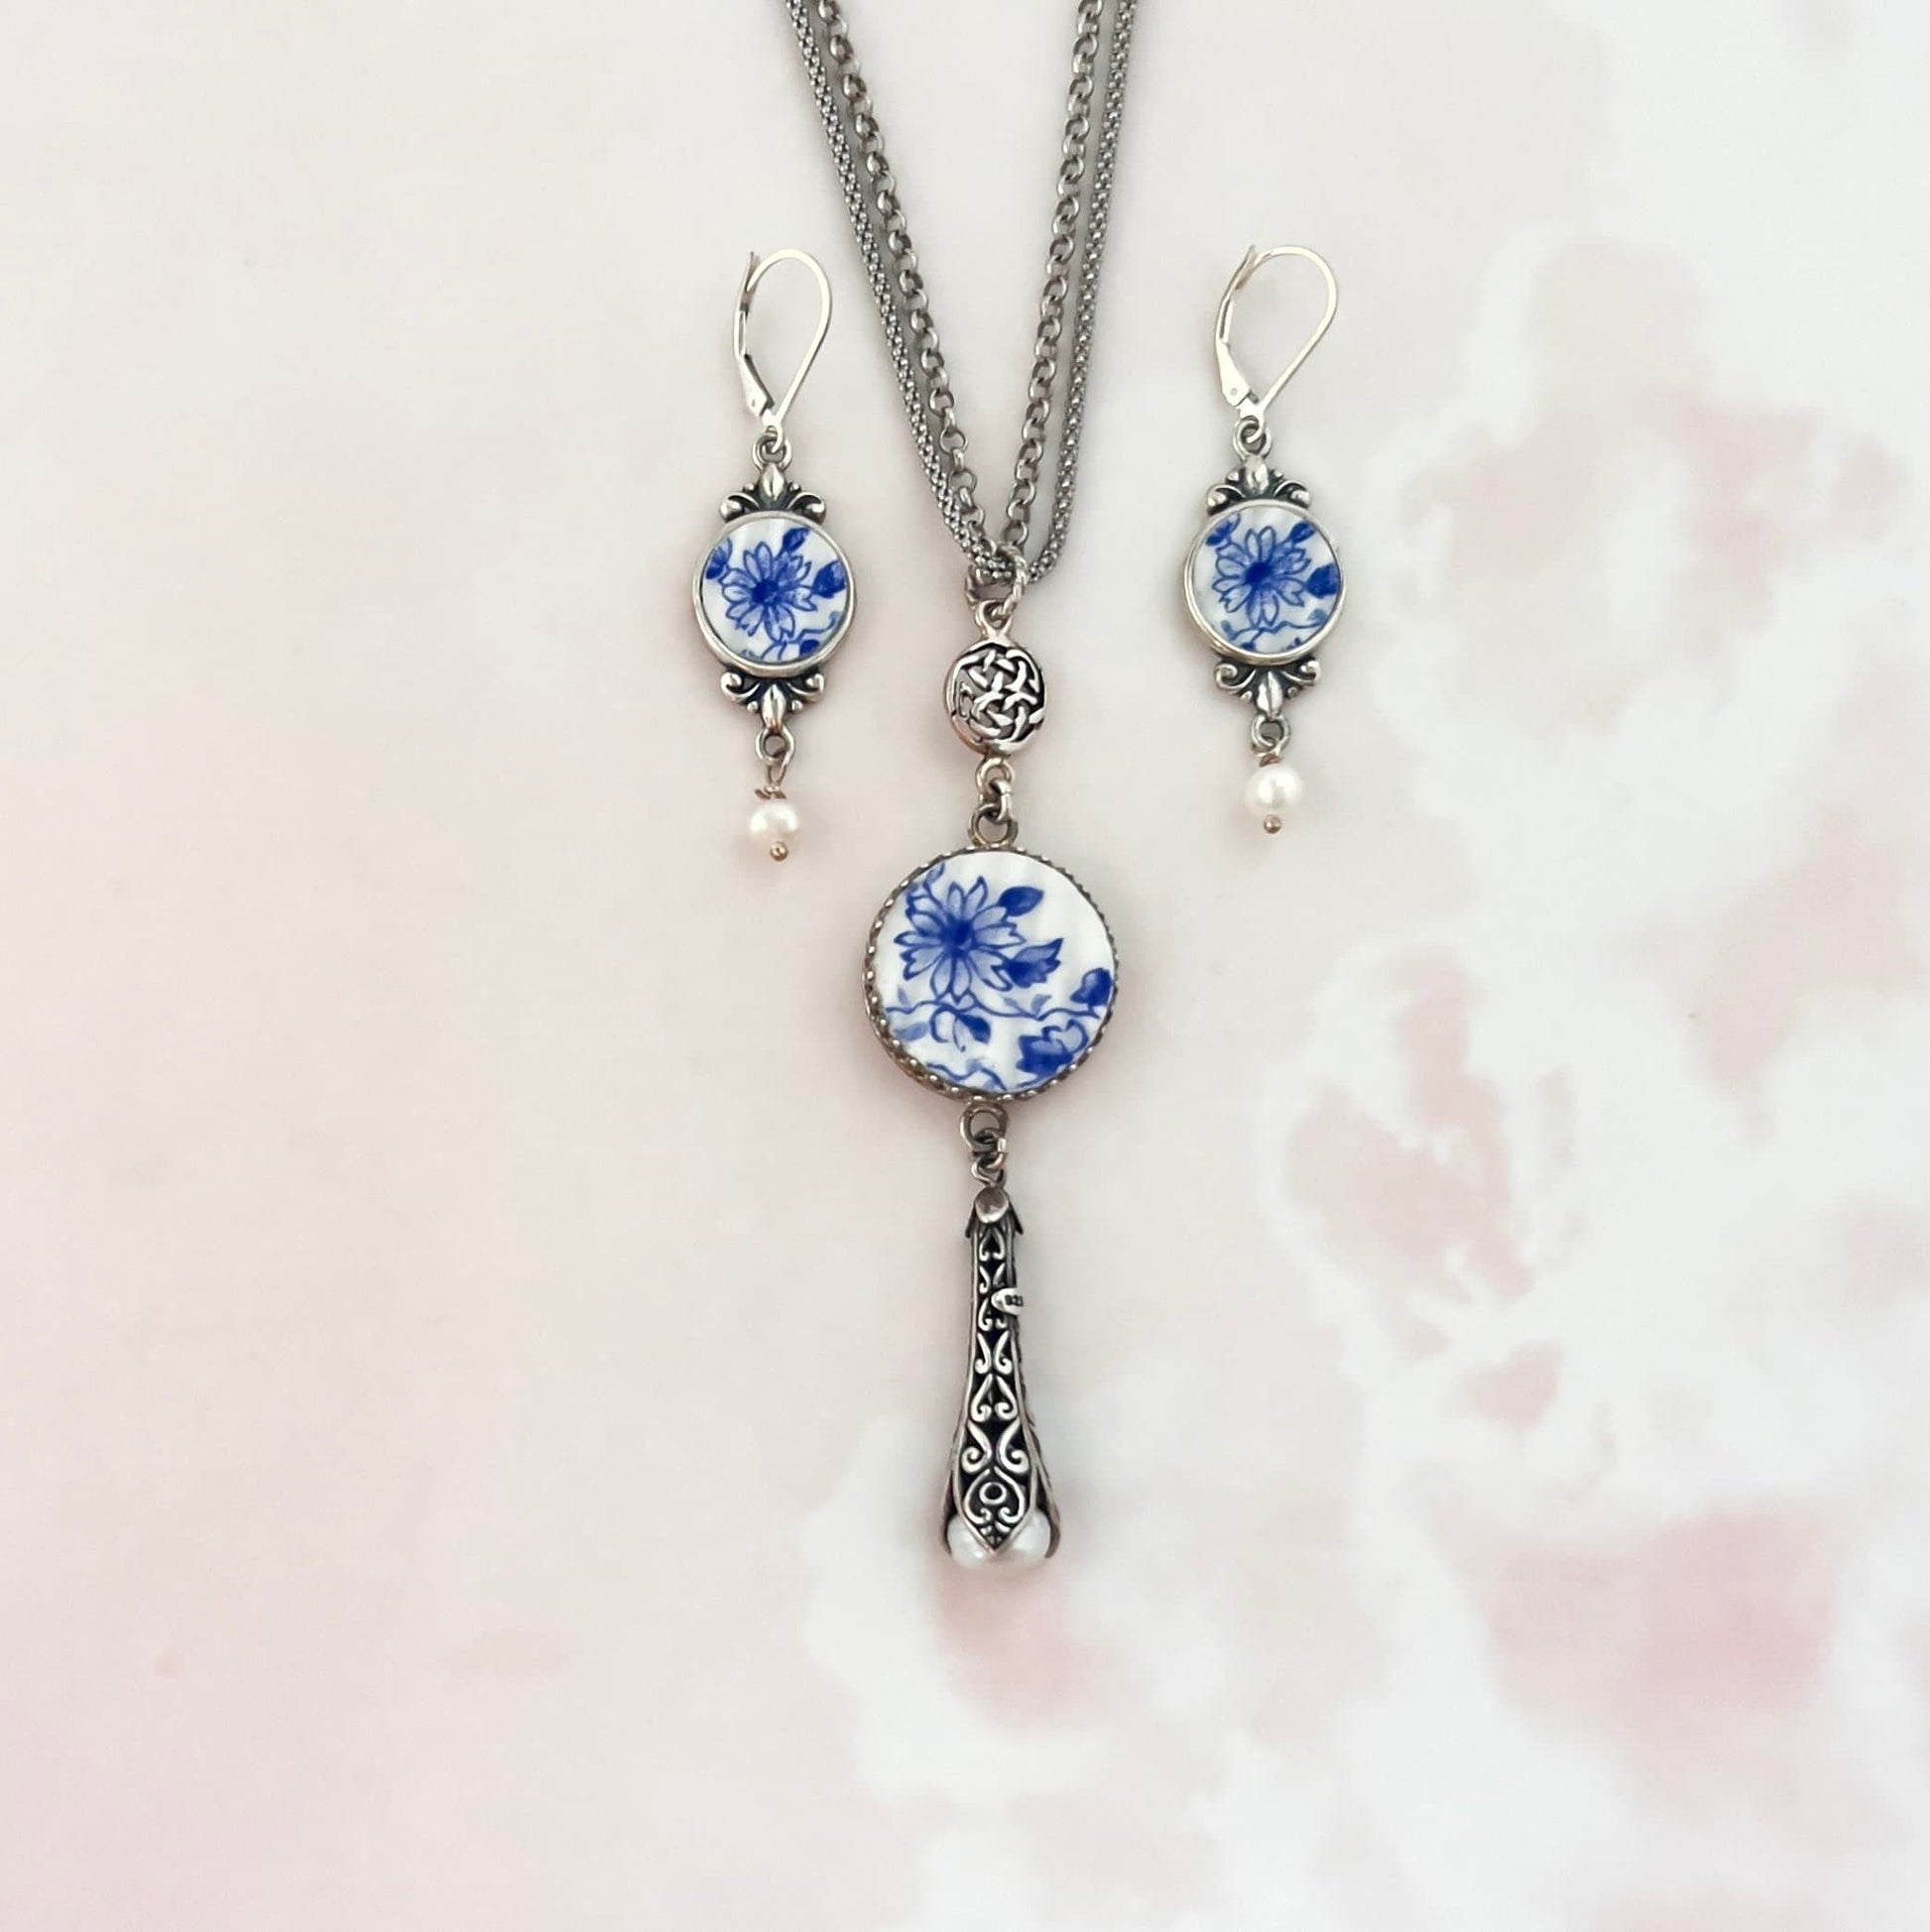 Unique 20th Anniversary Gift for Wife, Broken China Jewelry, Shelley Dainty Blue Victorian Jewelry